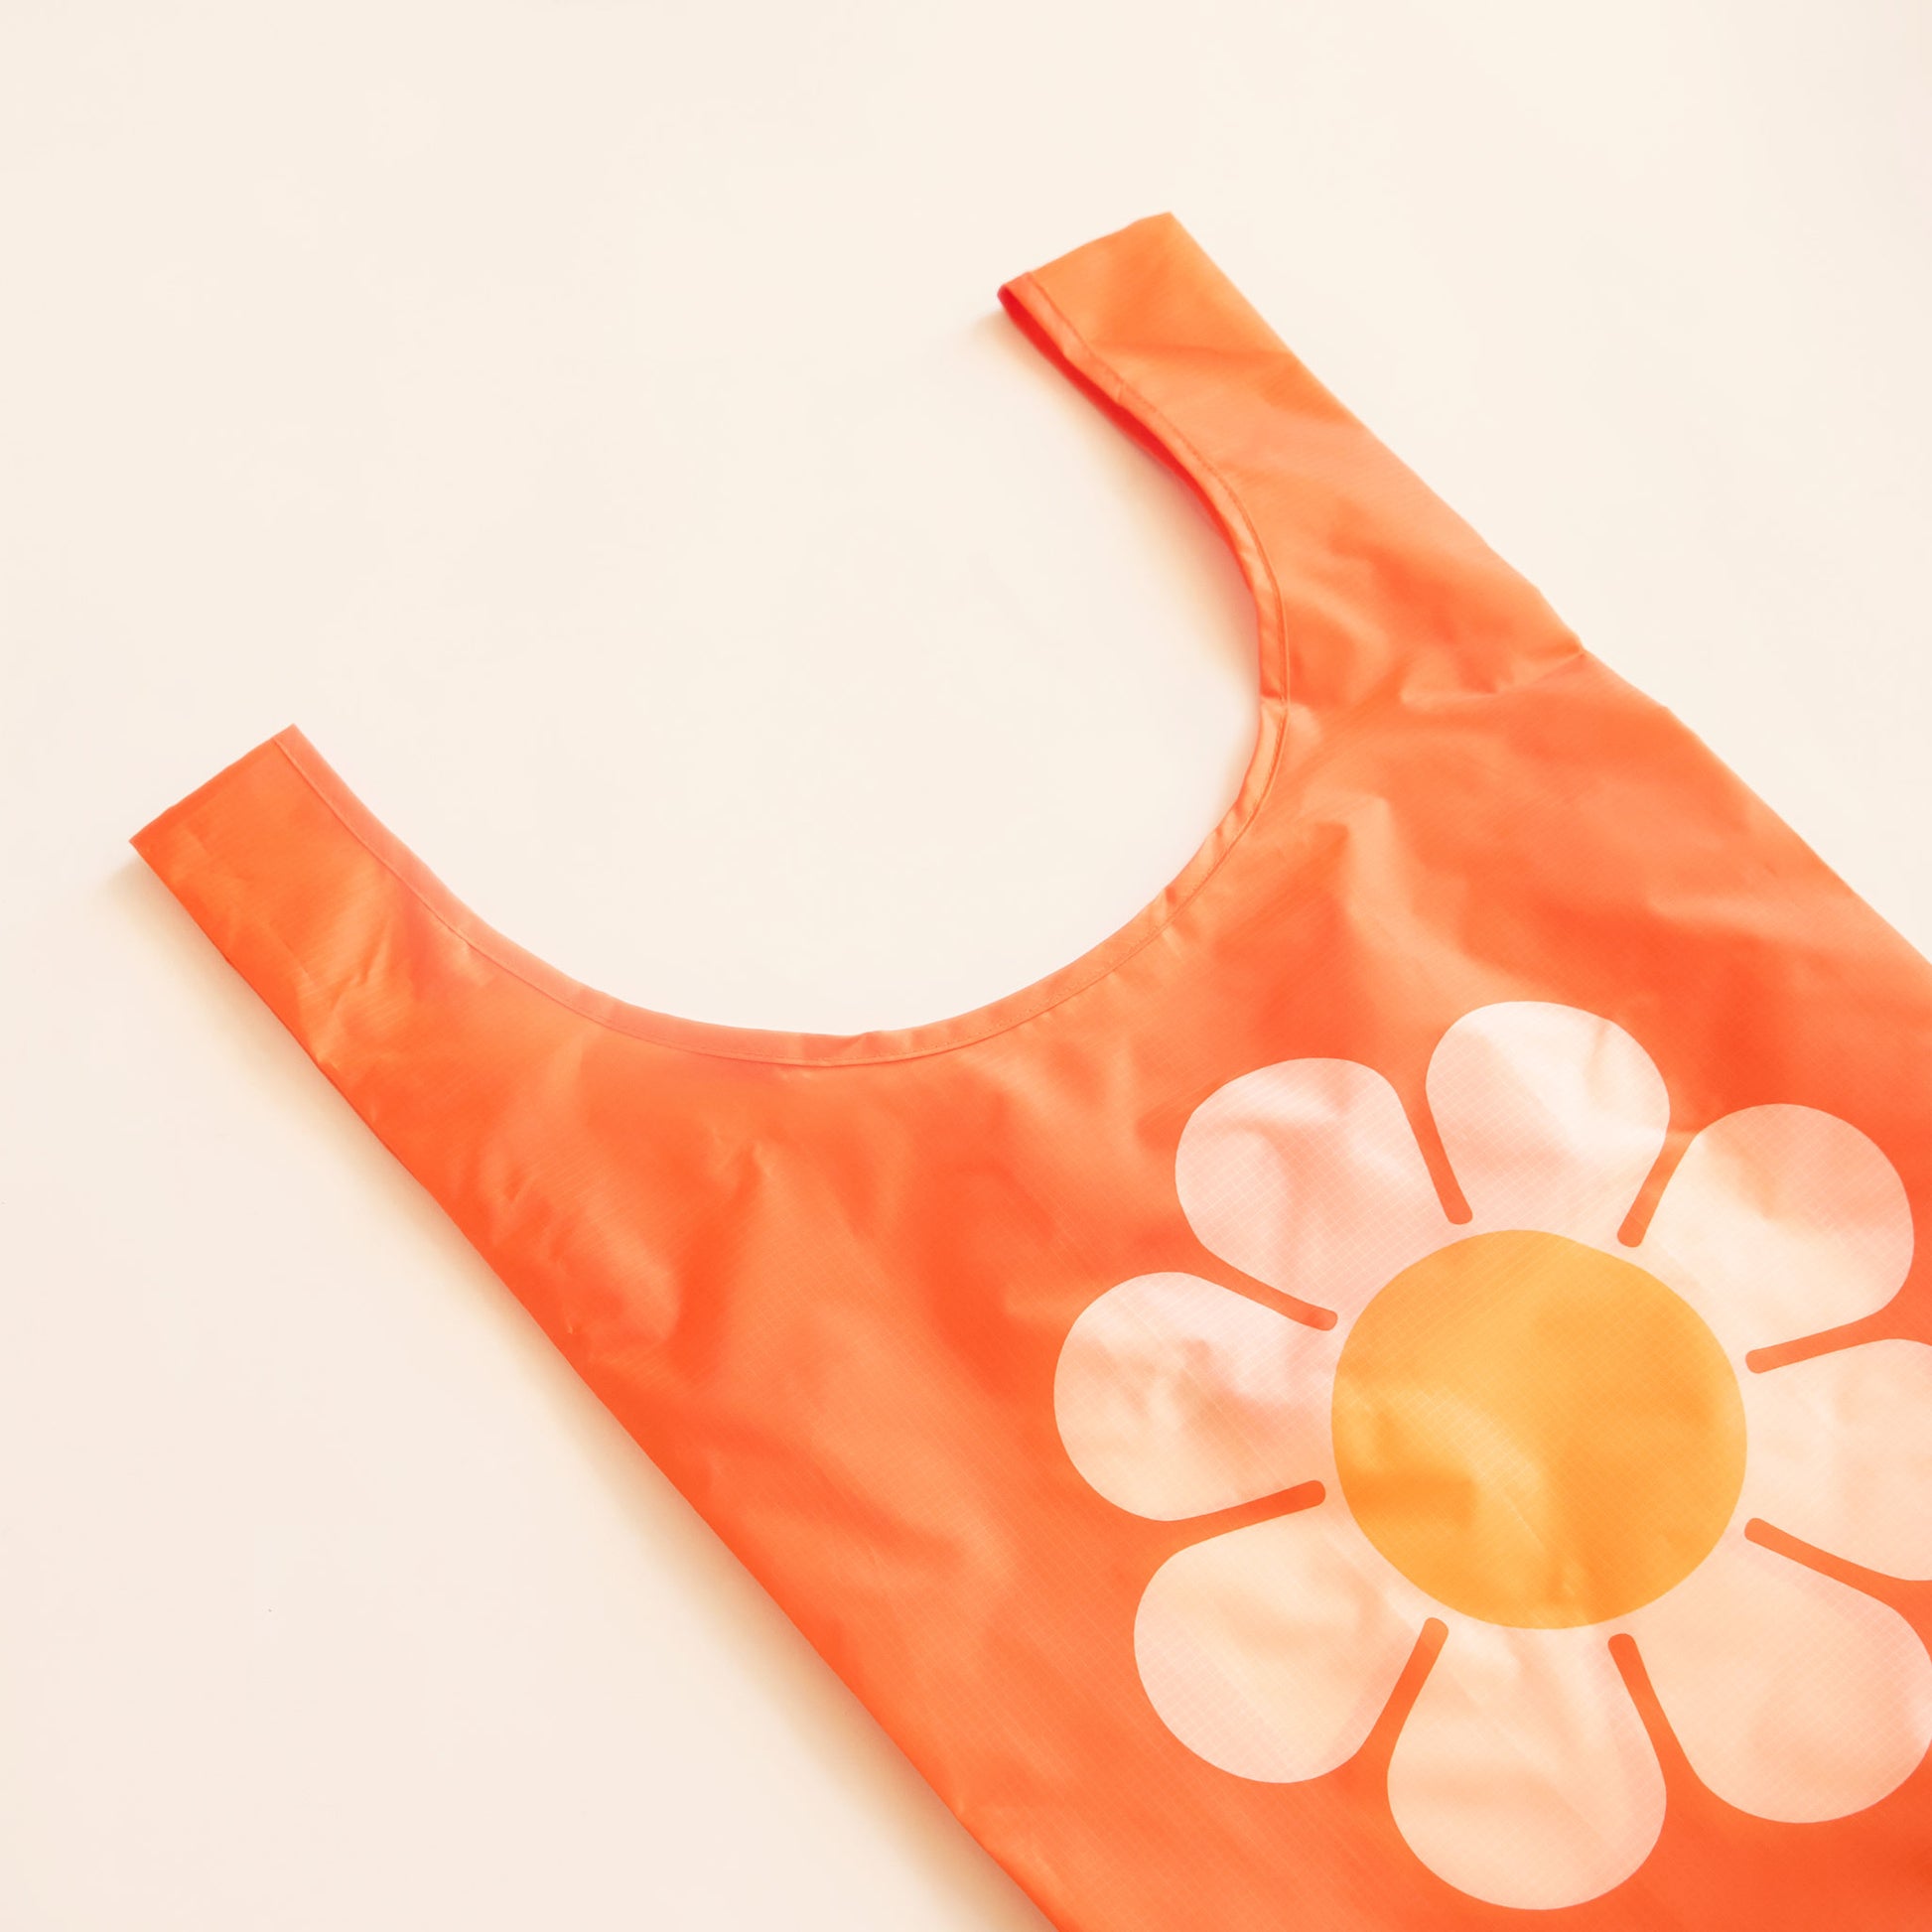 Orange reusable bag featuring a large bus flower with peach petals and tangerine center. The flower is positioned in the center of the bag. The bag is positioned flat on a table and has a 'U' shape between two handles.